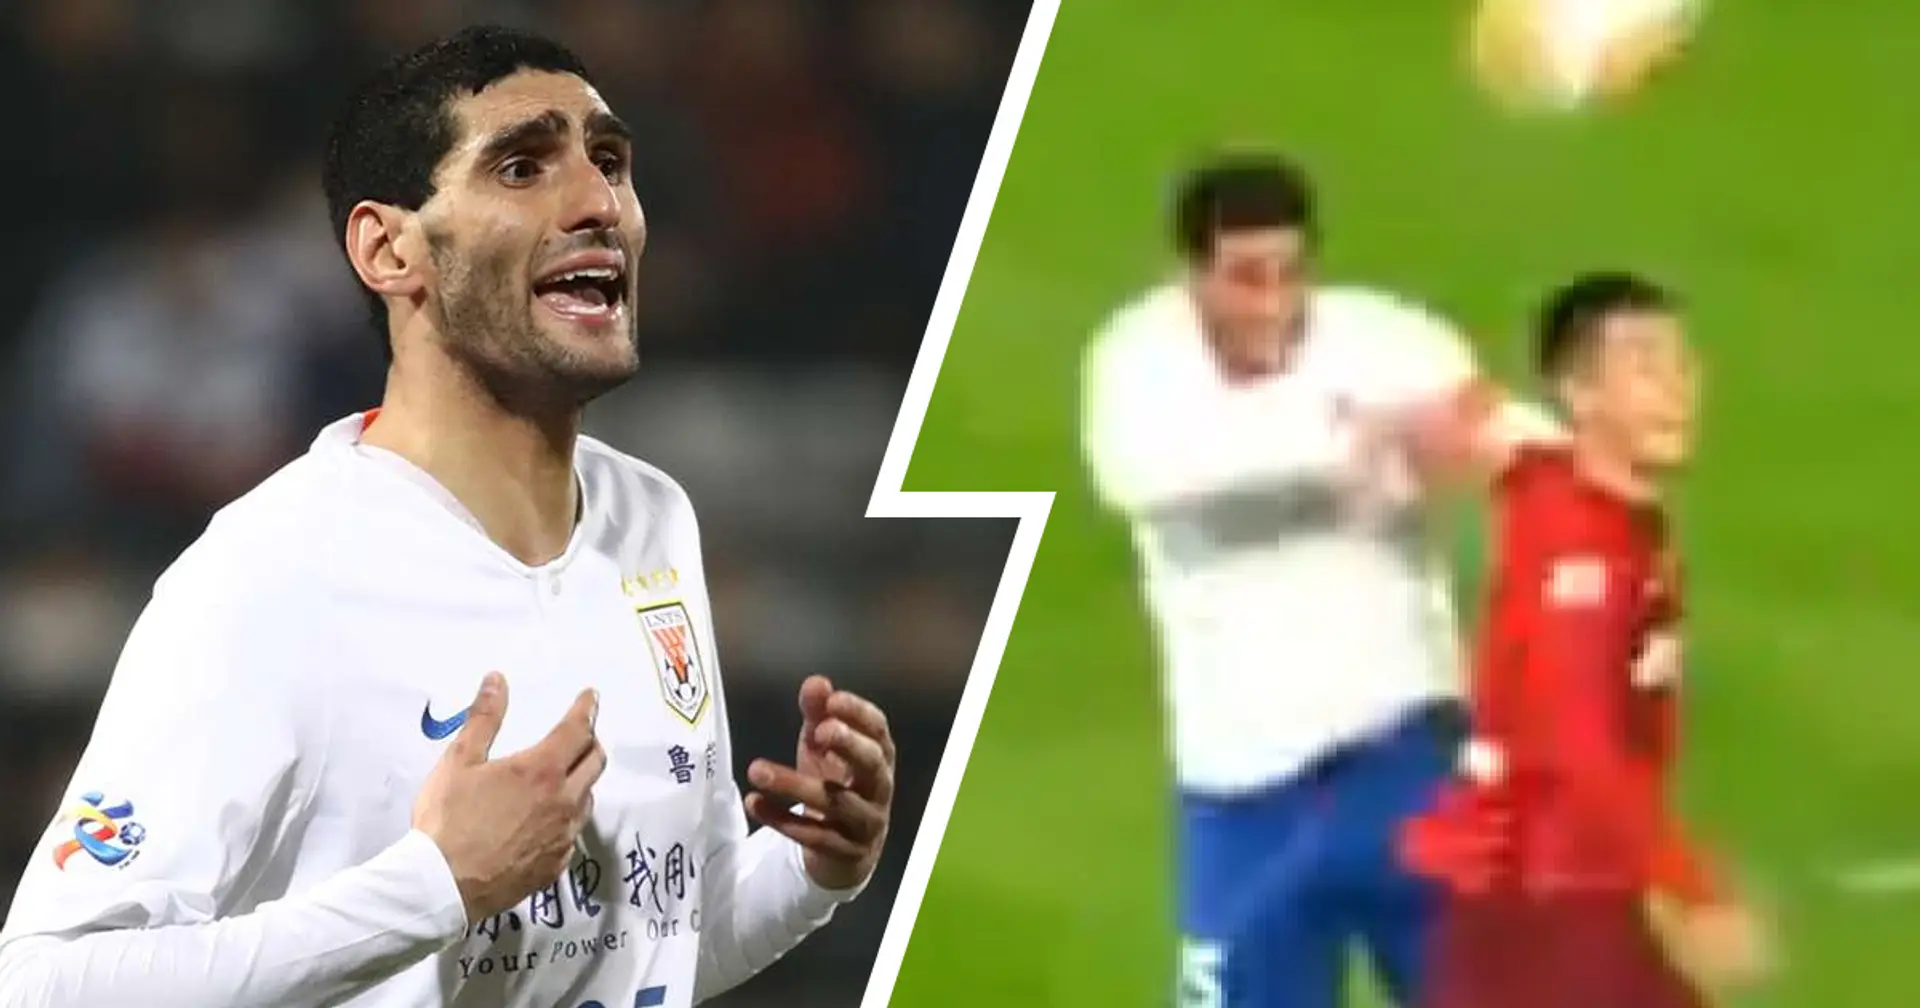 Marouane Fellaini asks referee to 'f*** off' after 94th-minute winning goal is disallowed